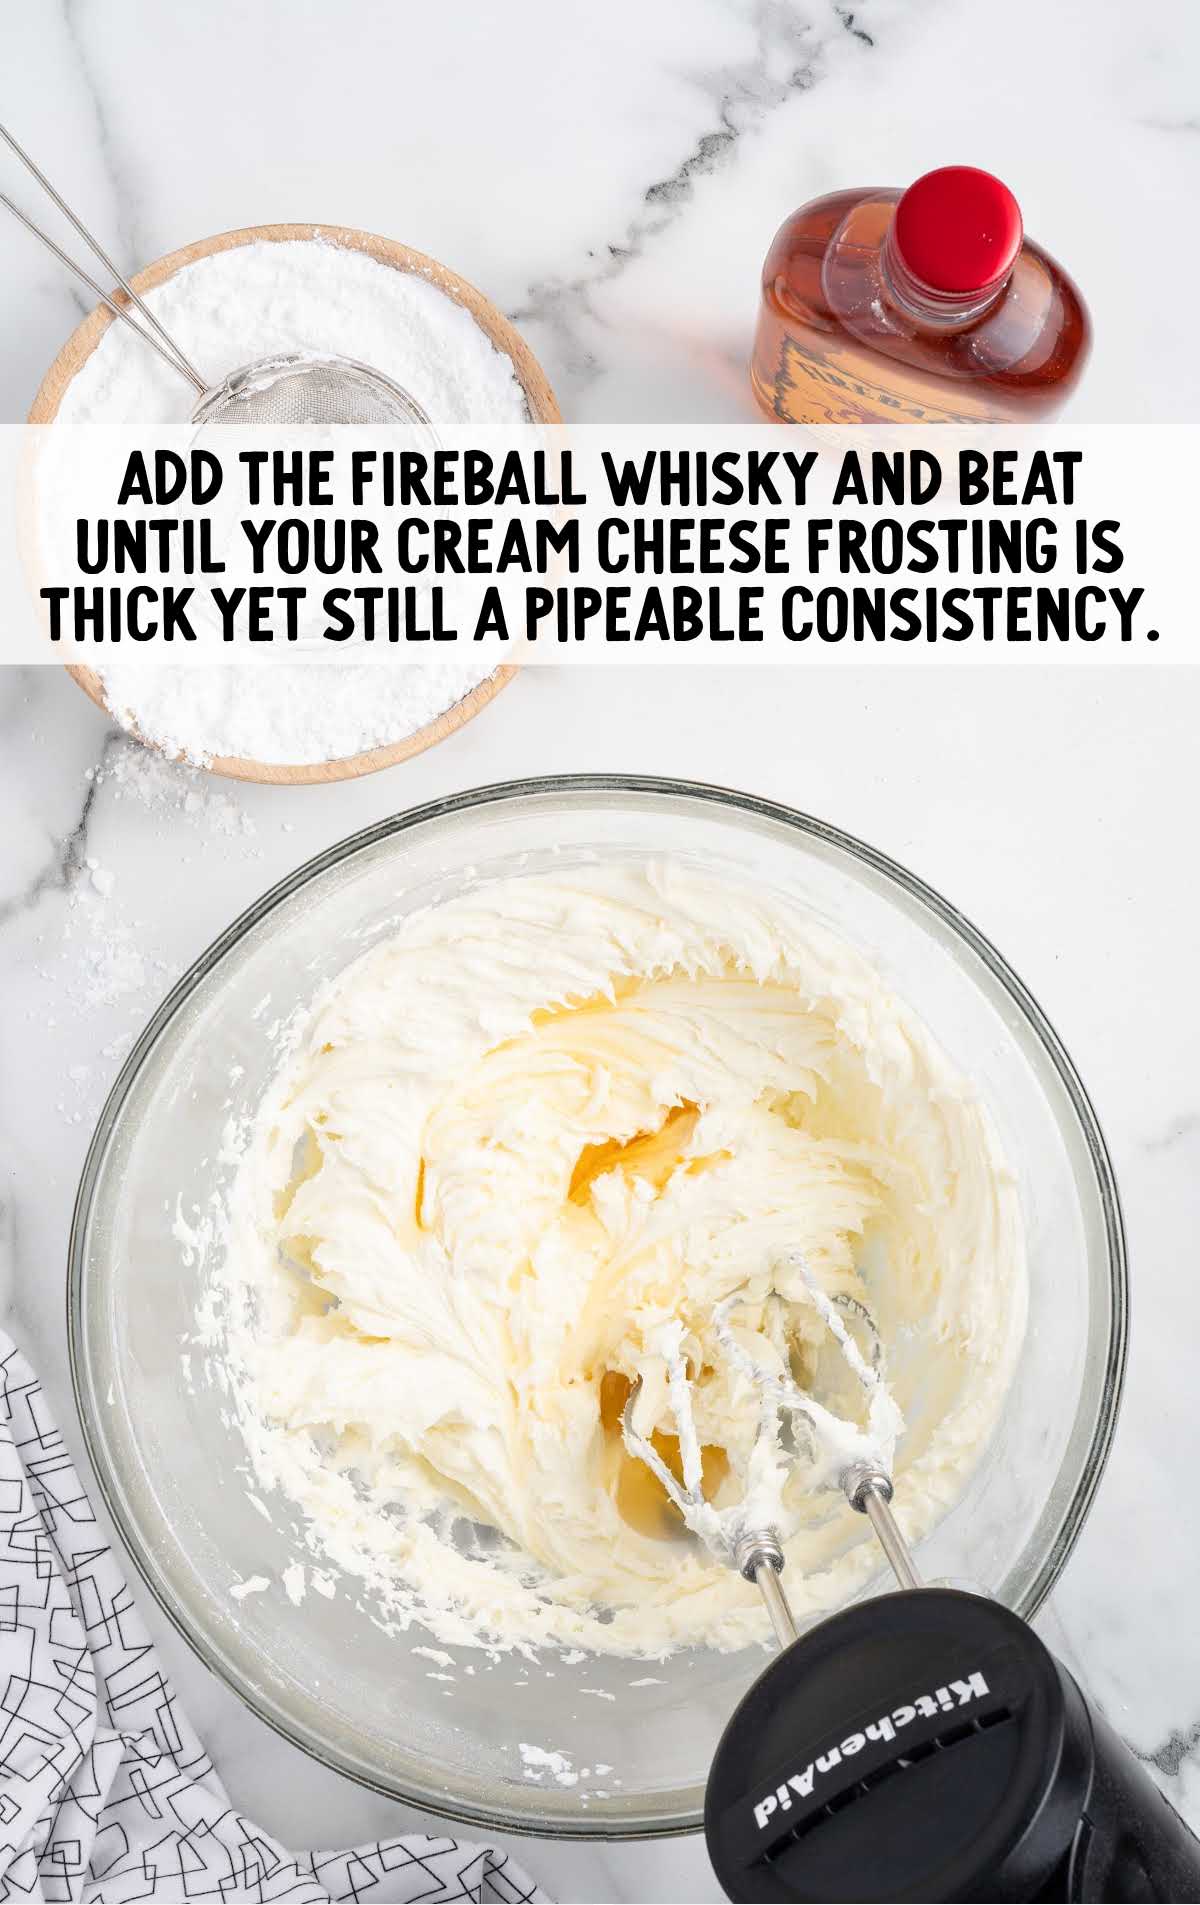 Fireball cinnamon whisky added to the frosting ingredients in a bowl